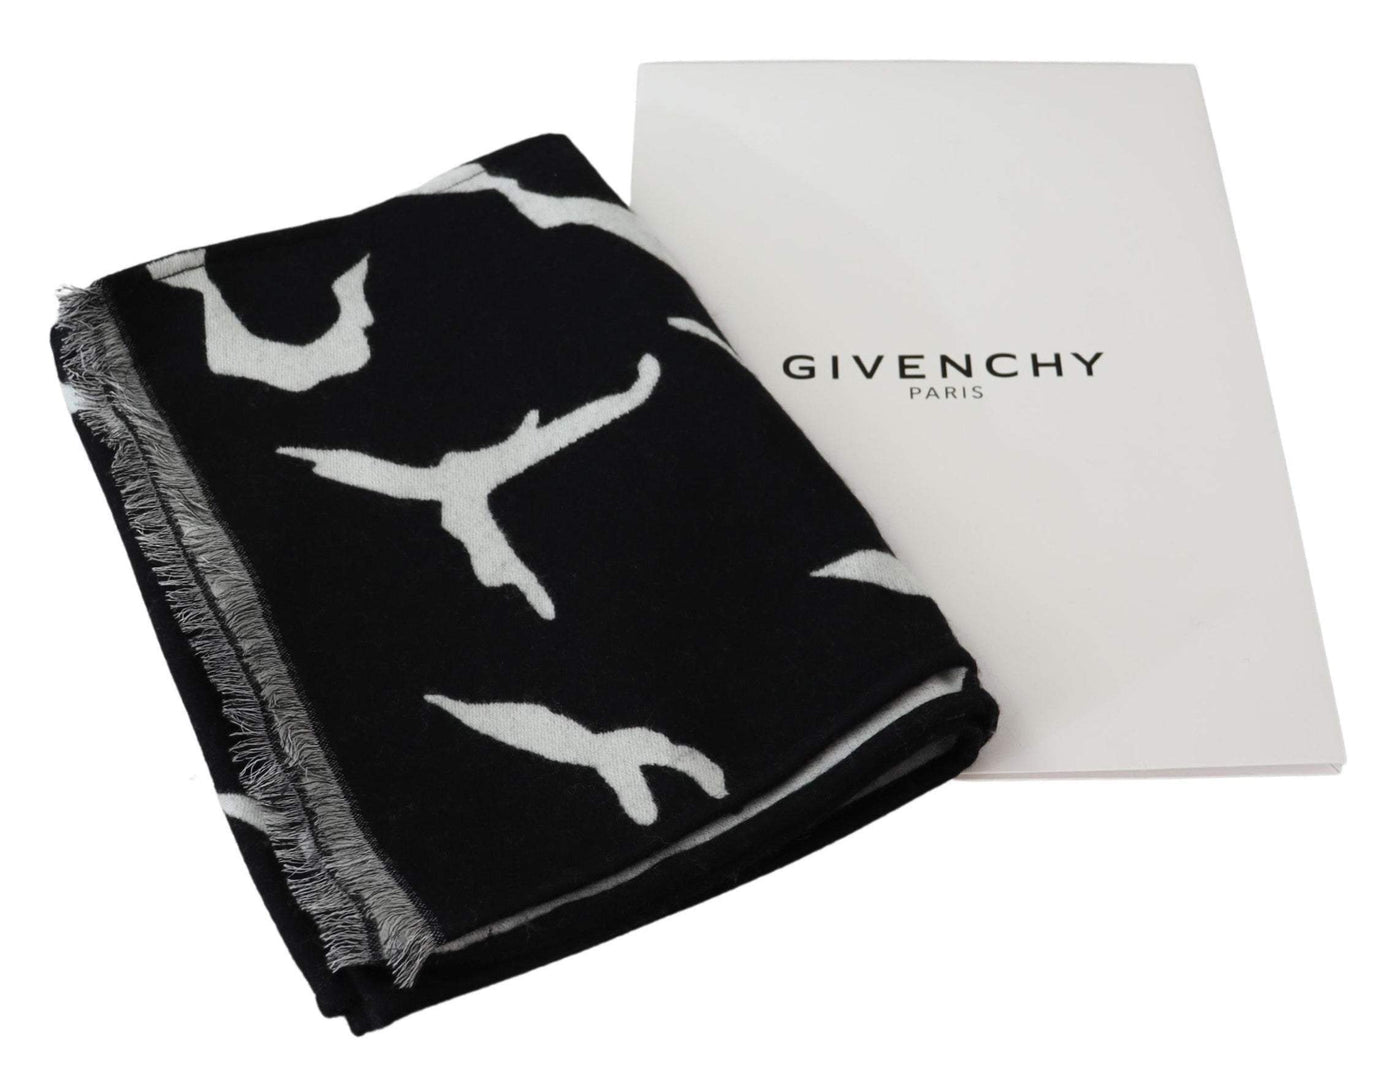 GIVENCHY Black White Wool Unisex Winter Warm Scarf Wrap Shawl #women, Accessories - New Arrivals, Black/White, feed-agegroup-adult, feed-color-black, feed-color-white, feed-gender-female, feed-size-58 cm|M, feed-size-OS, Gender_Women, GIVENCHY, Scarves - Men - Accessories, Scarves - Women - Accessories at SEYMAYKA